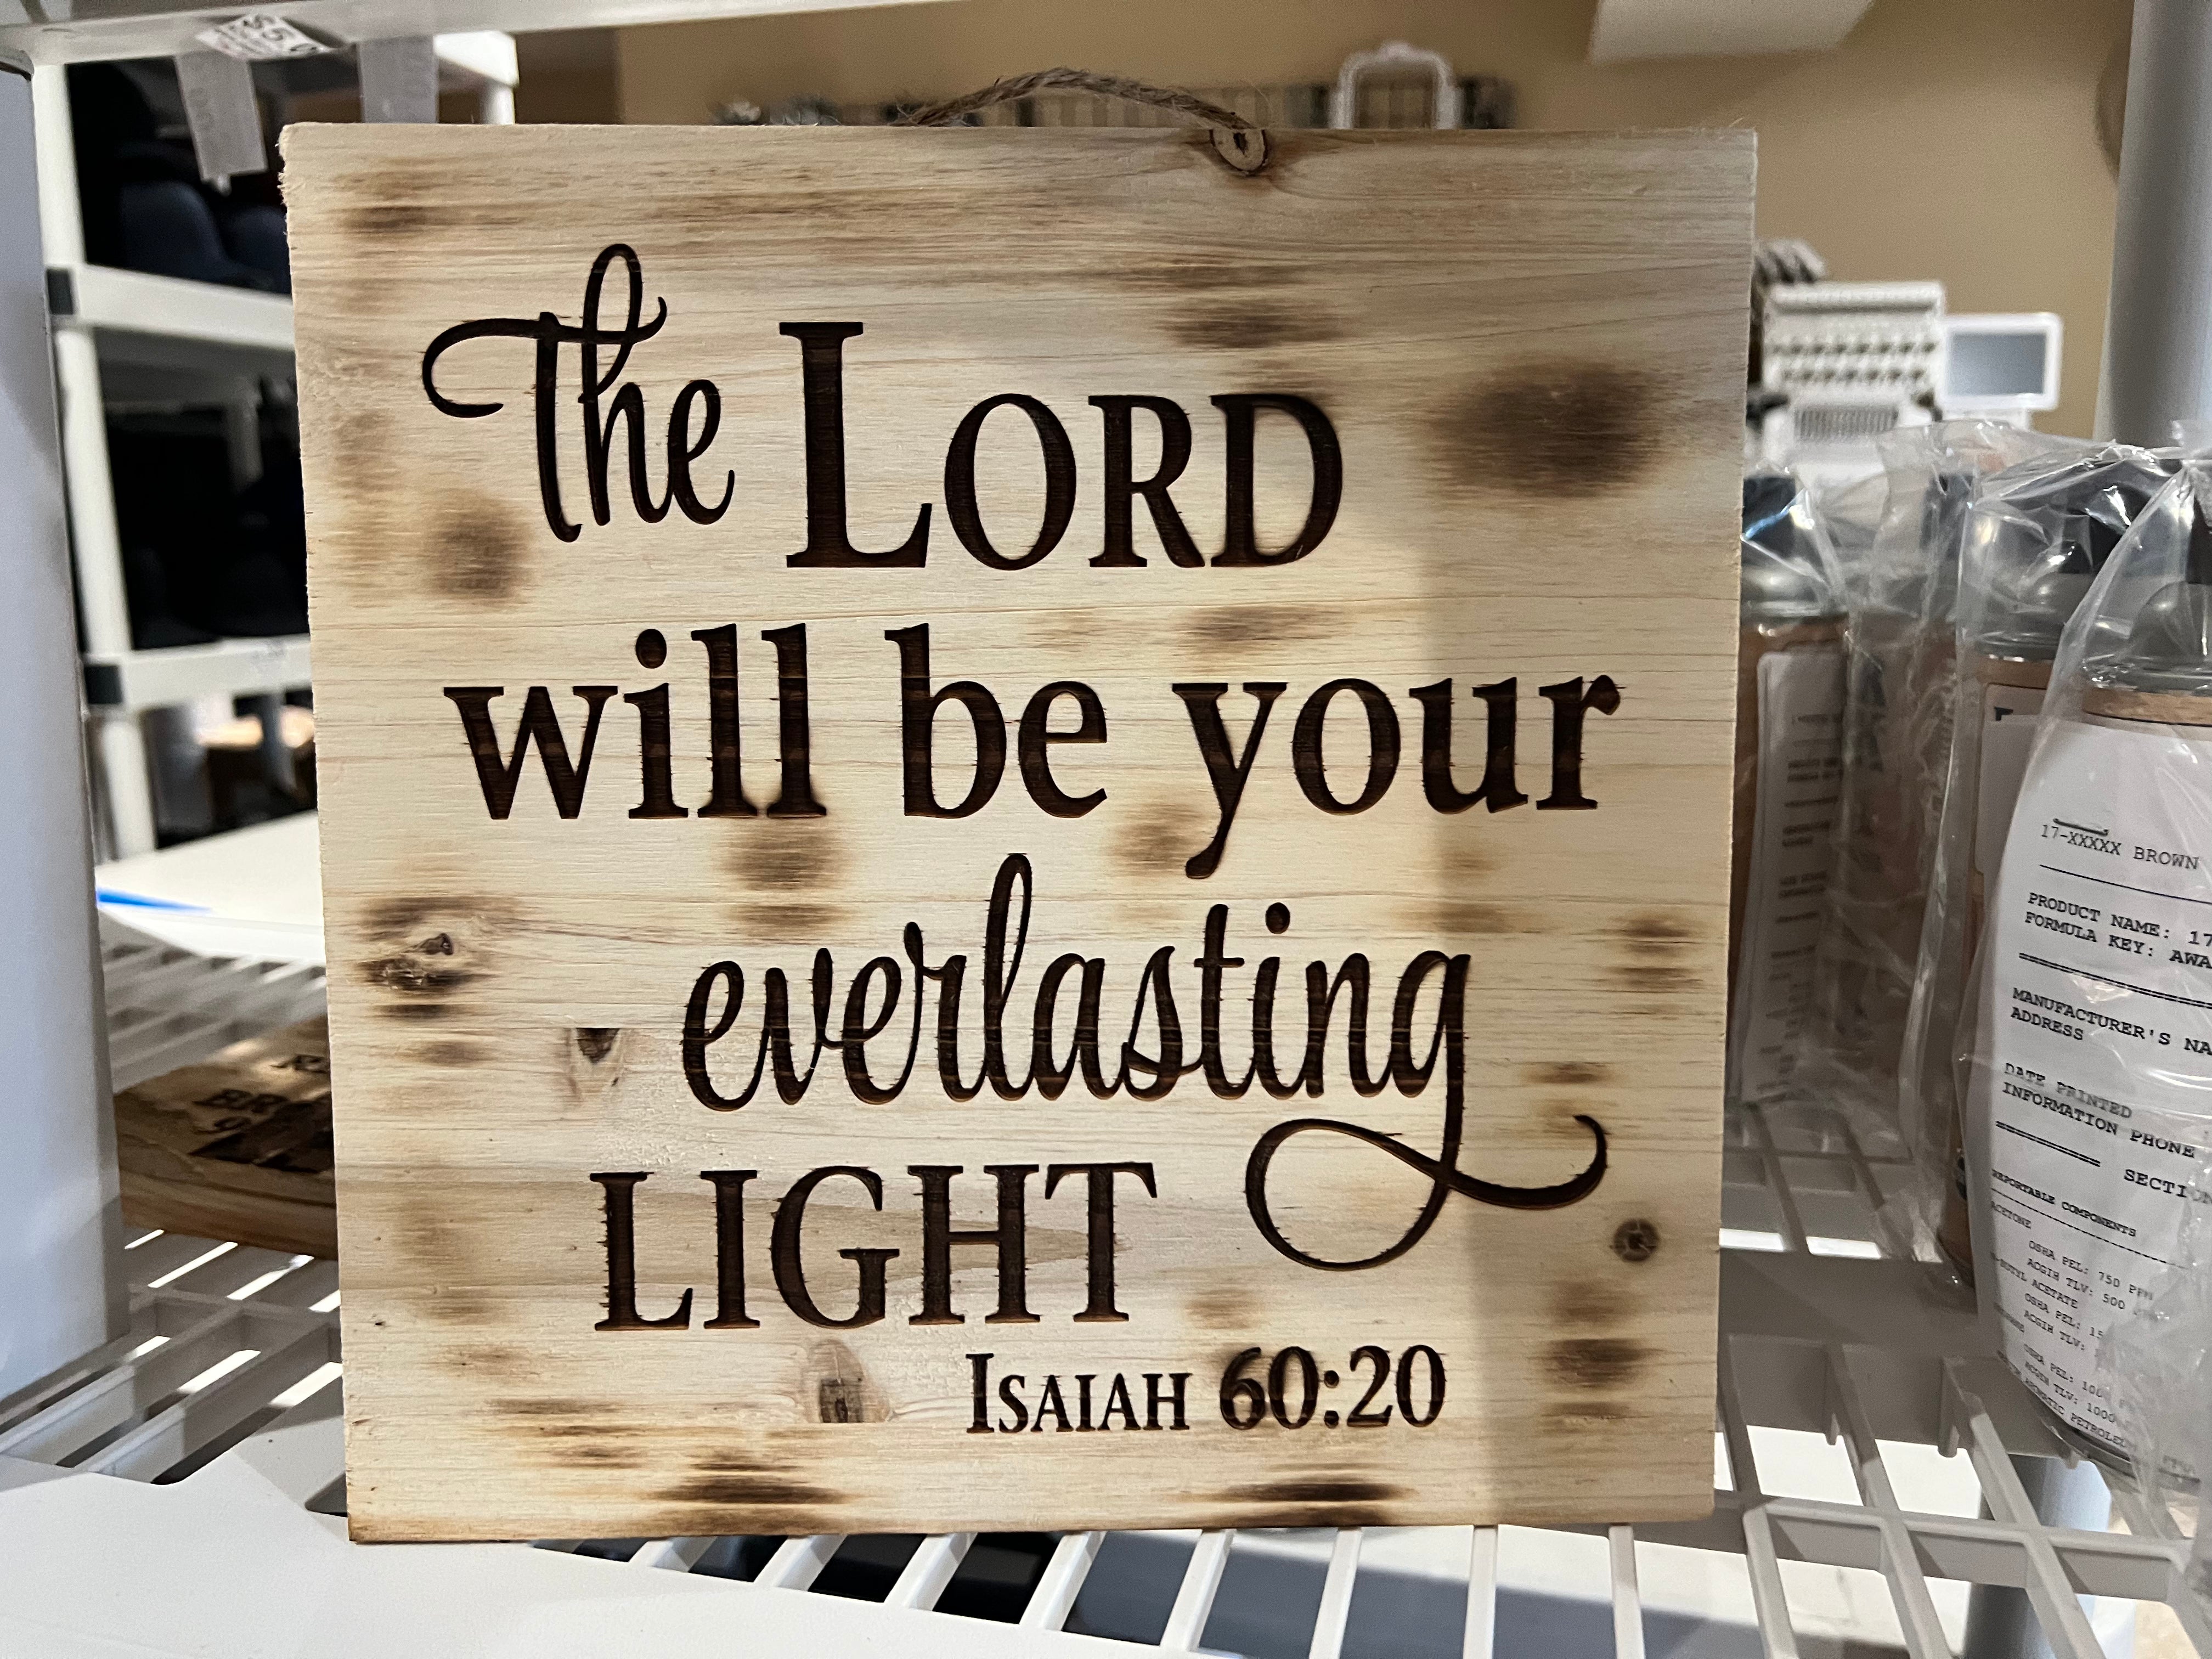 The Lord will be your Everlasting Light Engraved Wood Sign - Powercall Sirens LLC